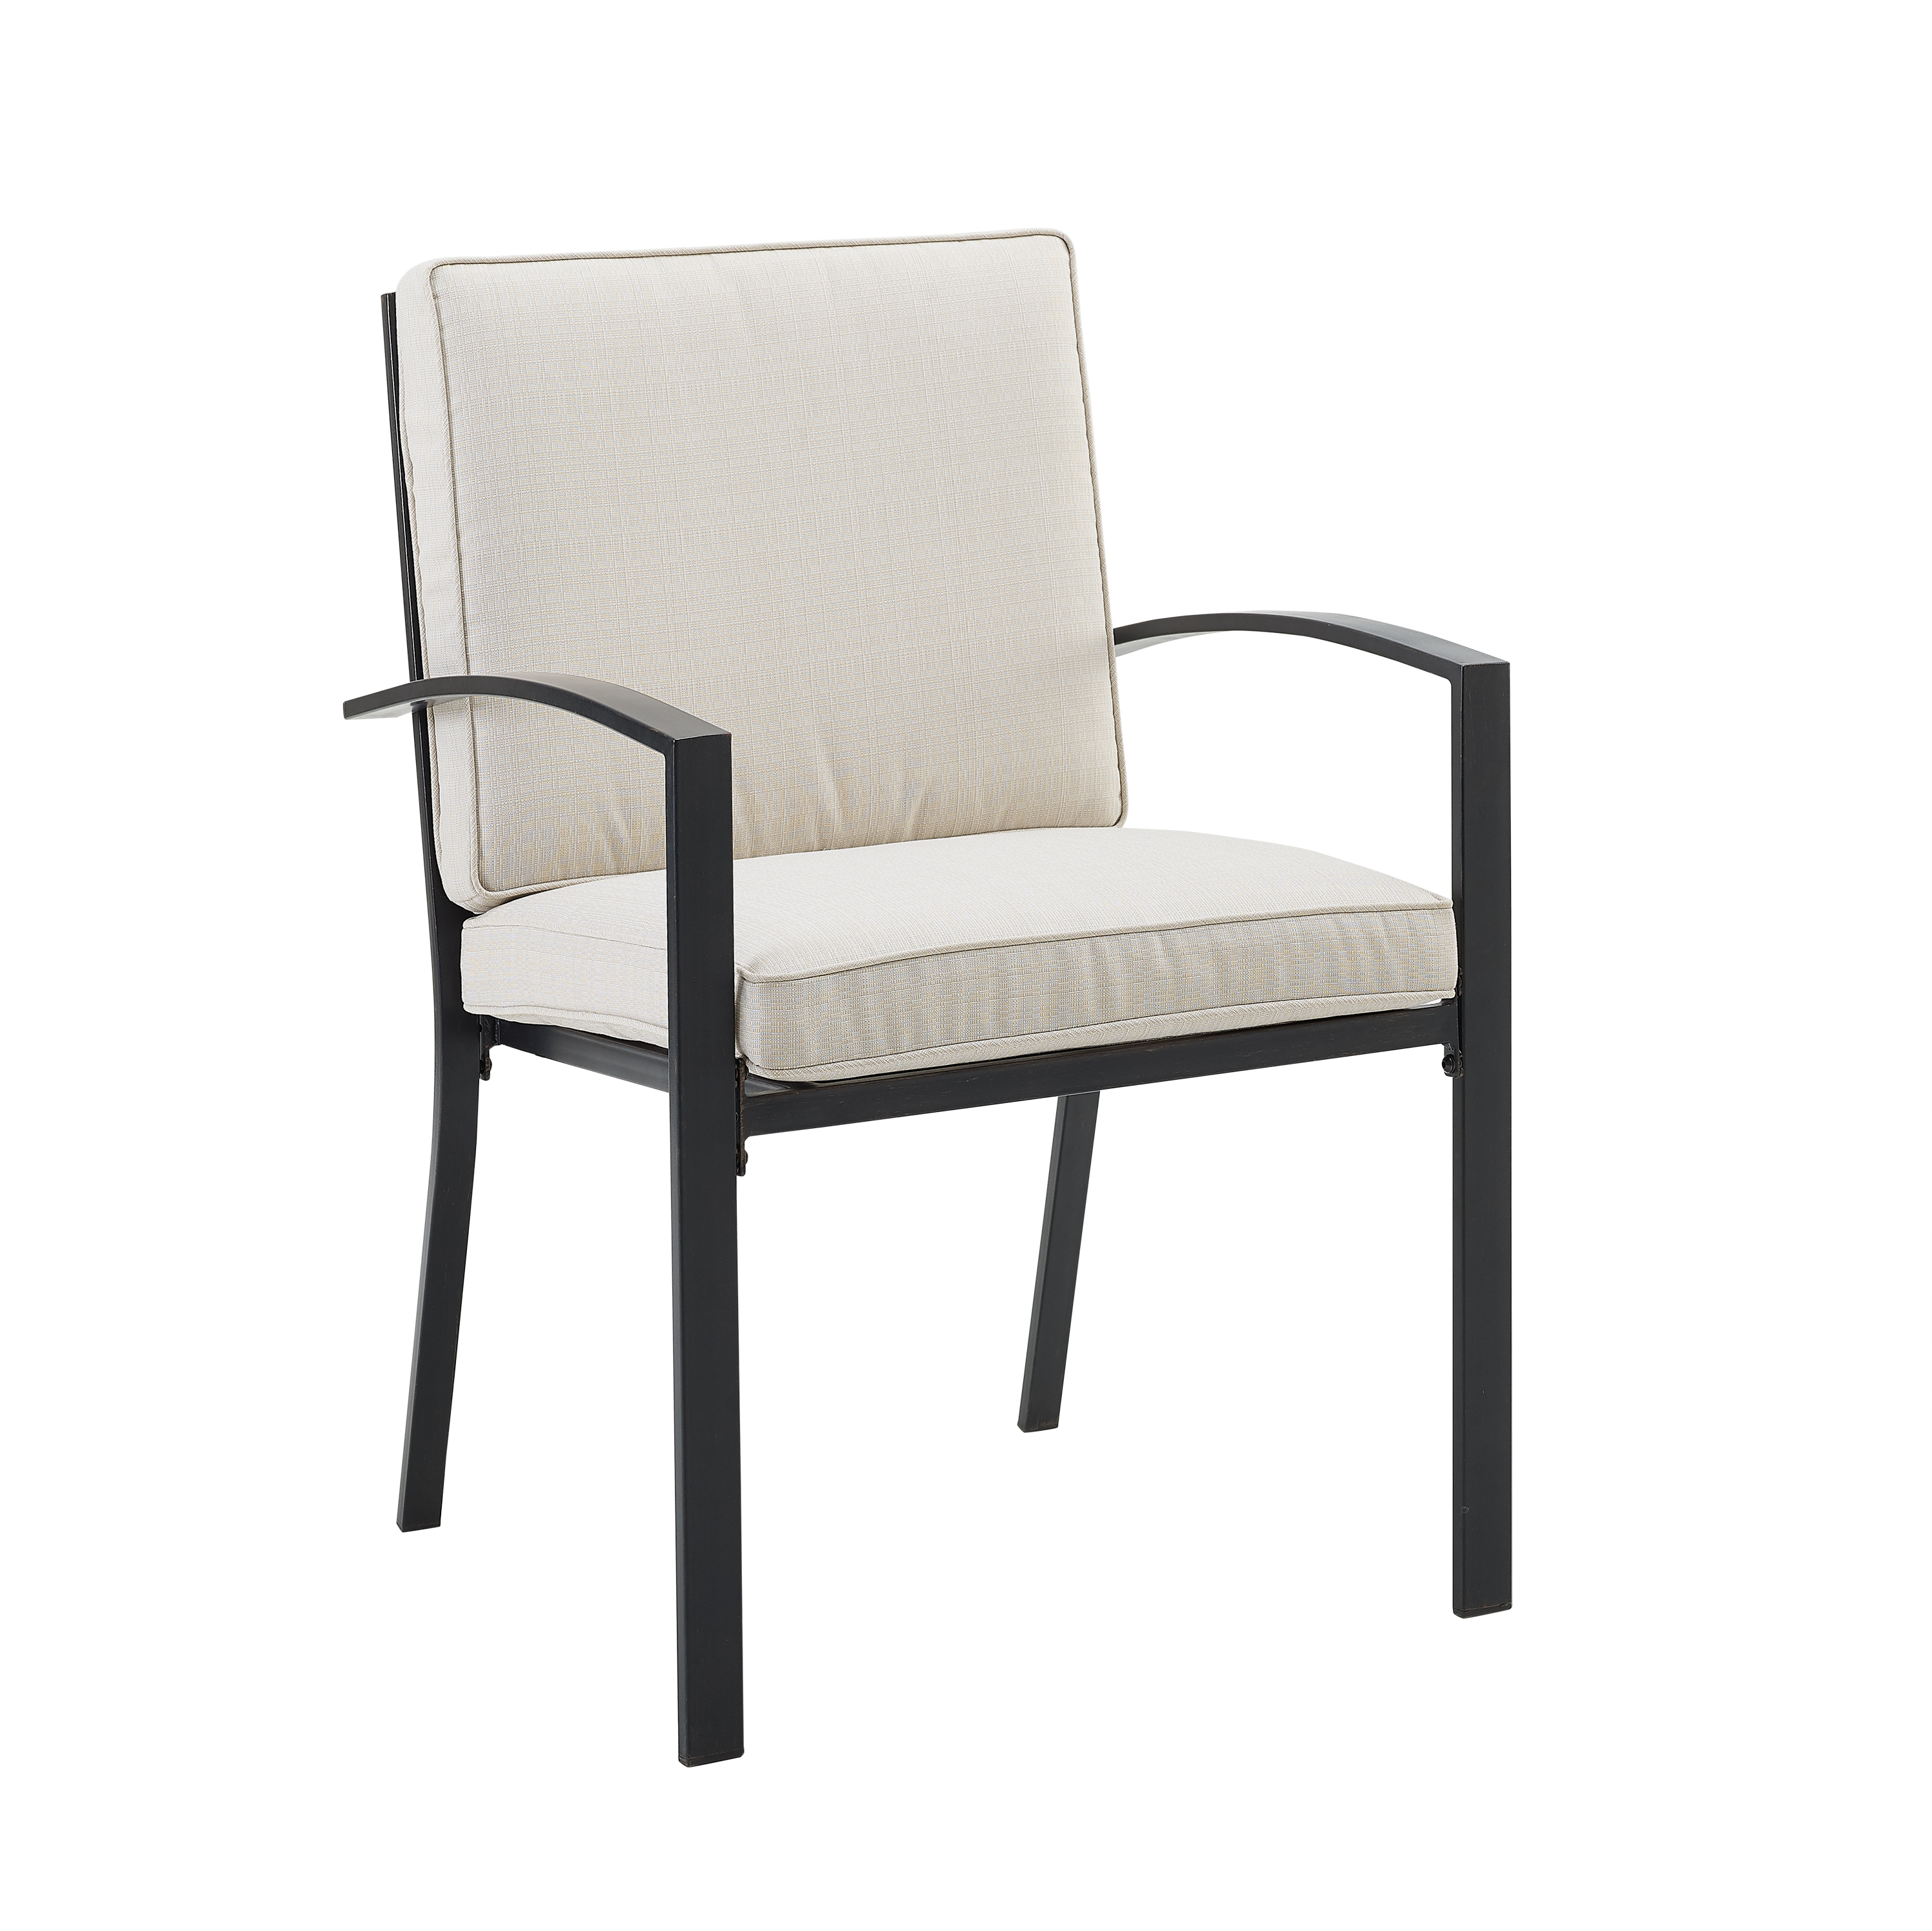 Crosley Furniture Kaplan Fabric Outdoor Dining Chair Set in Oatmeal (Set of 2) - image 3 of 12